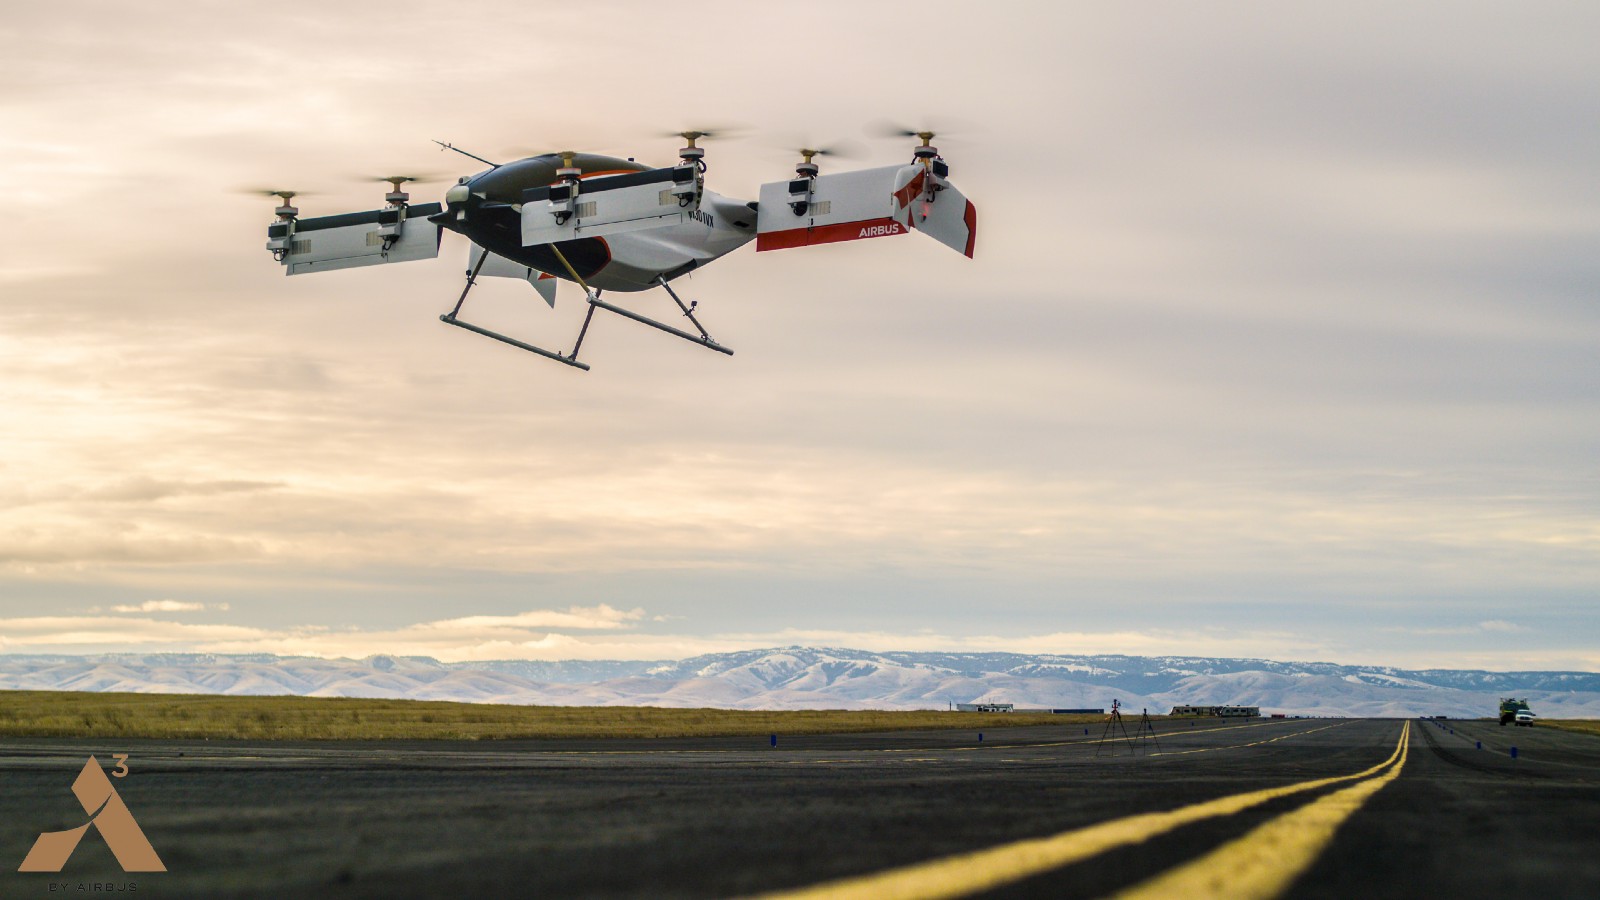 Airbus conducted its first test flight of its air taxi